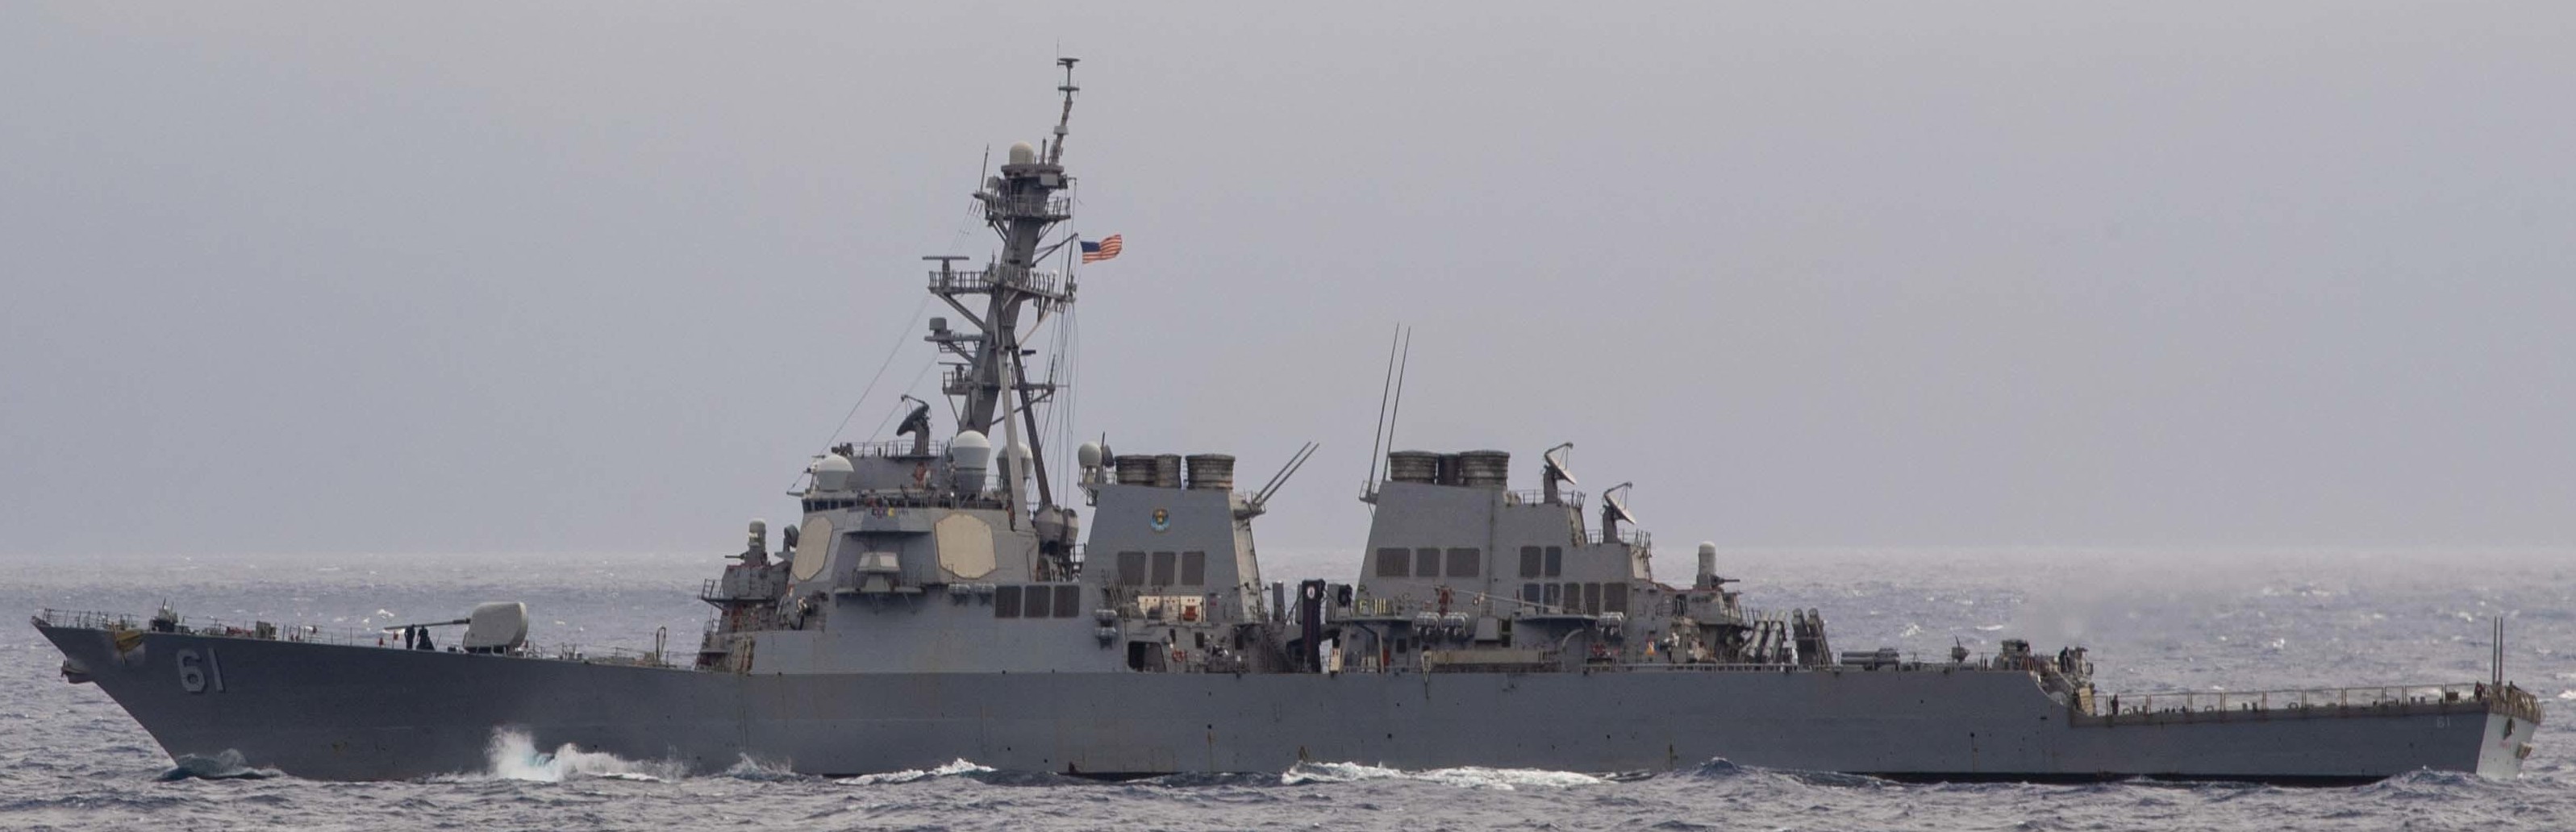 ddg-61 uss ramage guided missile destroyer arleigh burke class aegis us navy 92